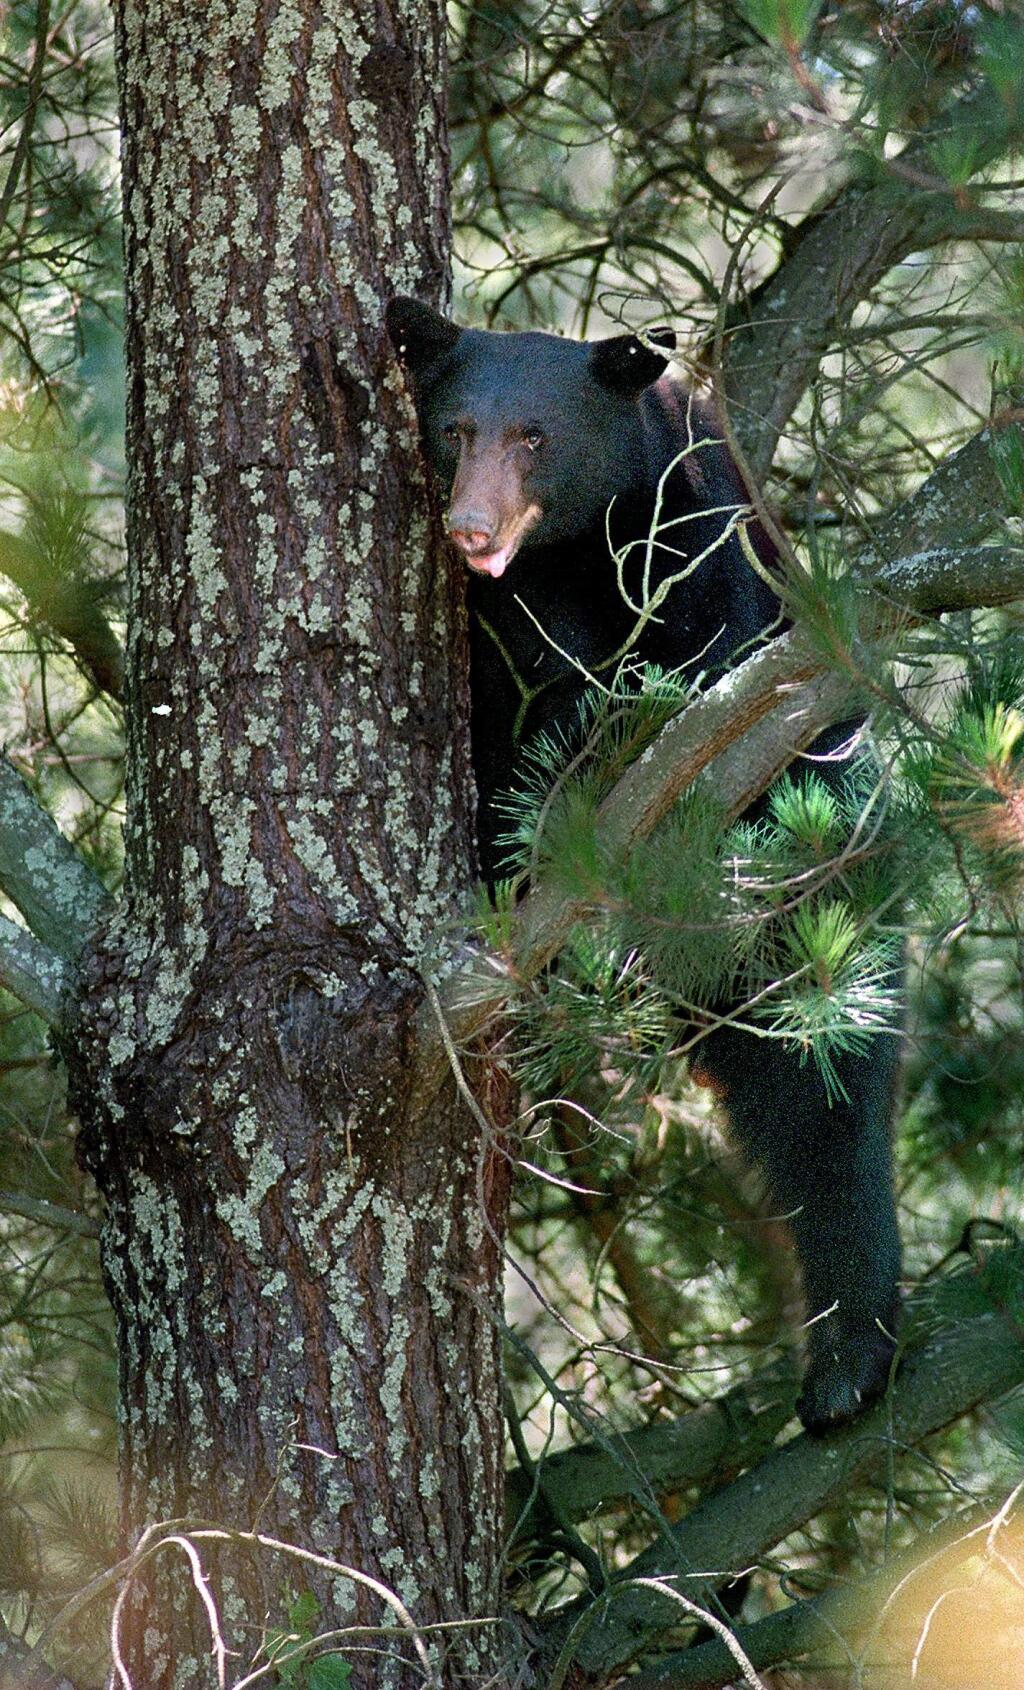 In 2013, a California black bear tookrefuge in a tree behind the Gaige House in Glen Ellen A biologist from the Department of Fish and Game tranquilized the 125 pound male bear. (Kent Porter/Press Democrat)